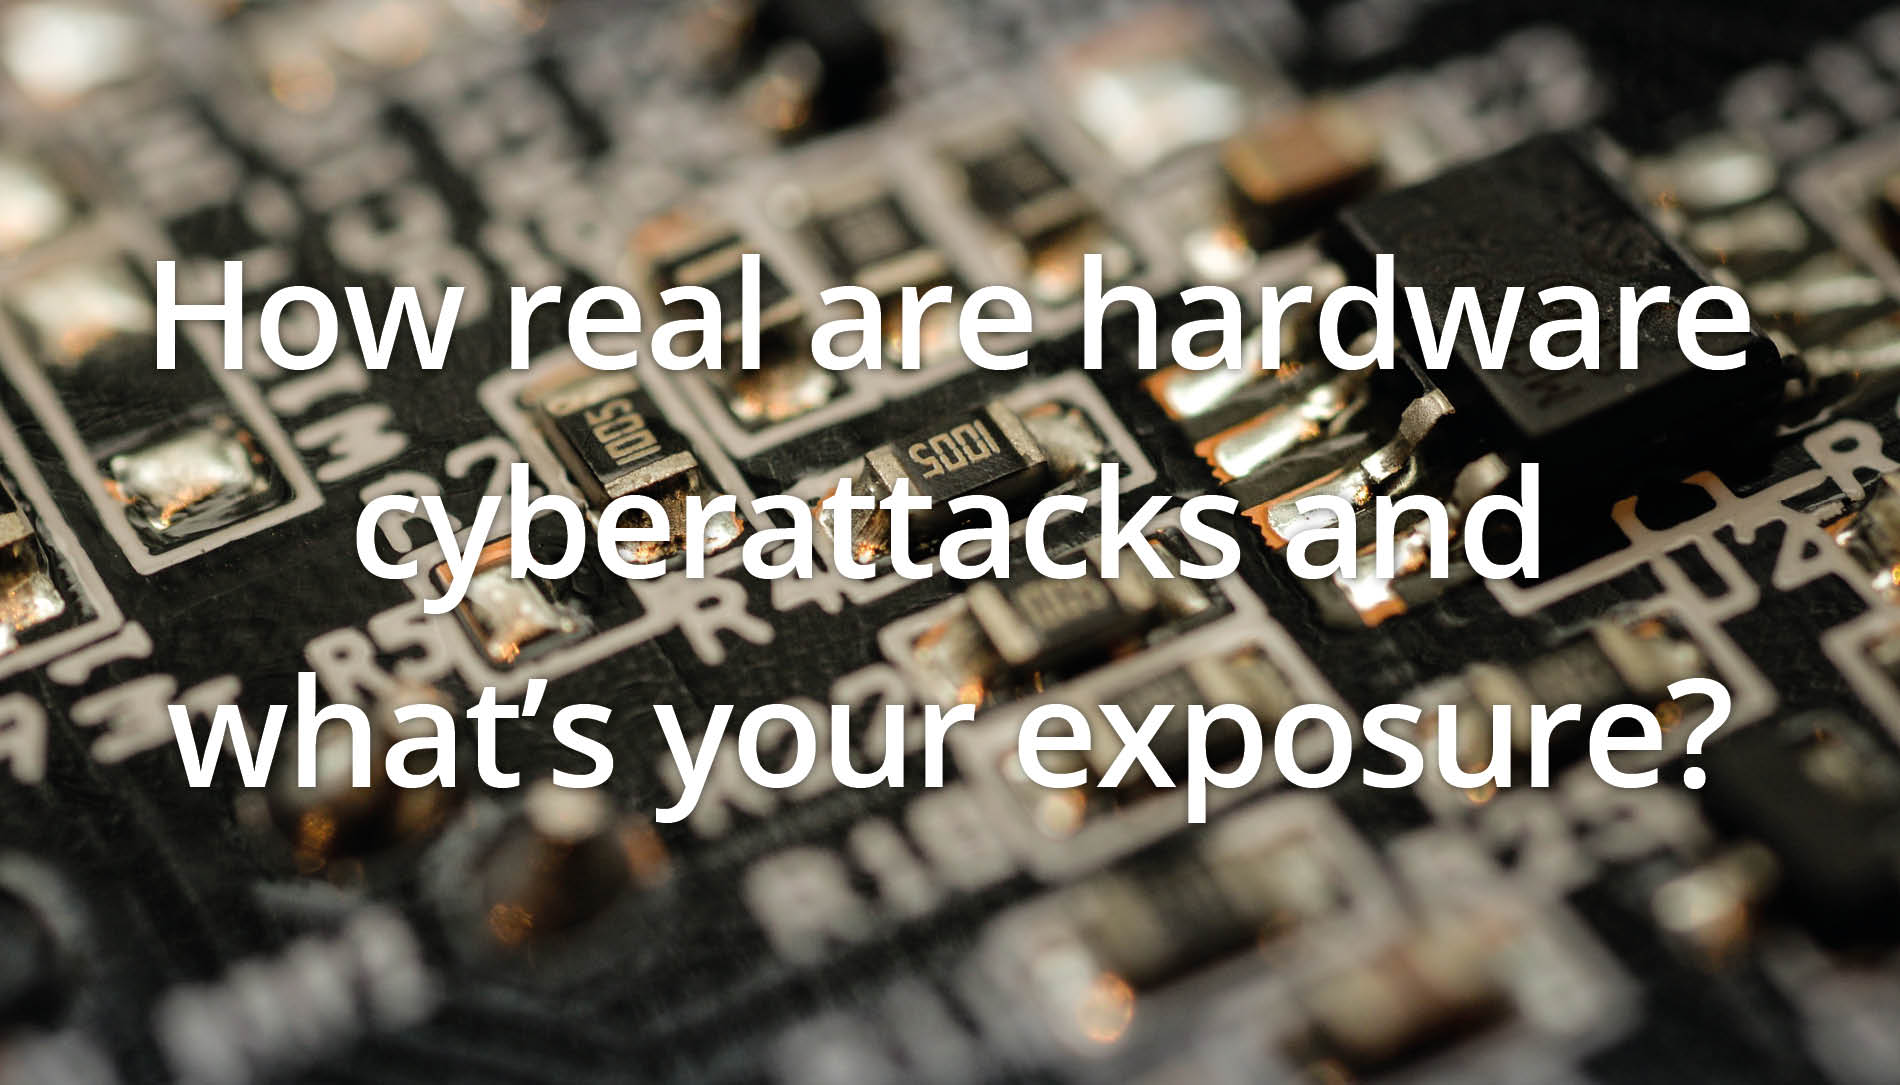 How real are hardware cyberattacks and what’s your exposure?